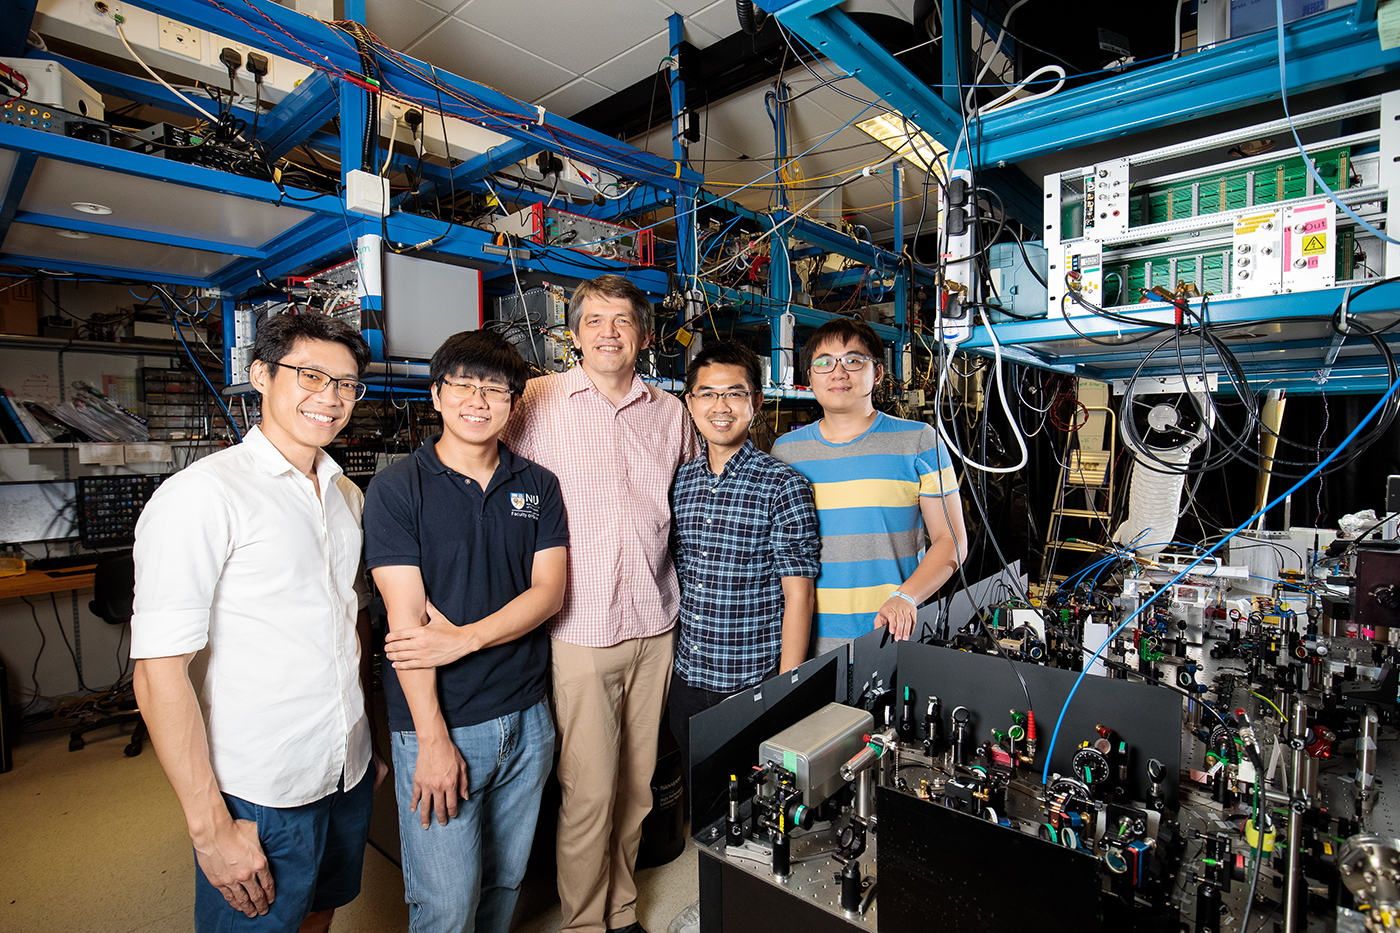 Making headway with a hybrid approach to quantum computing